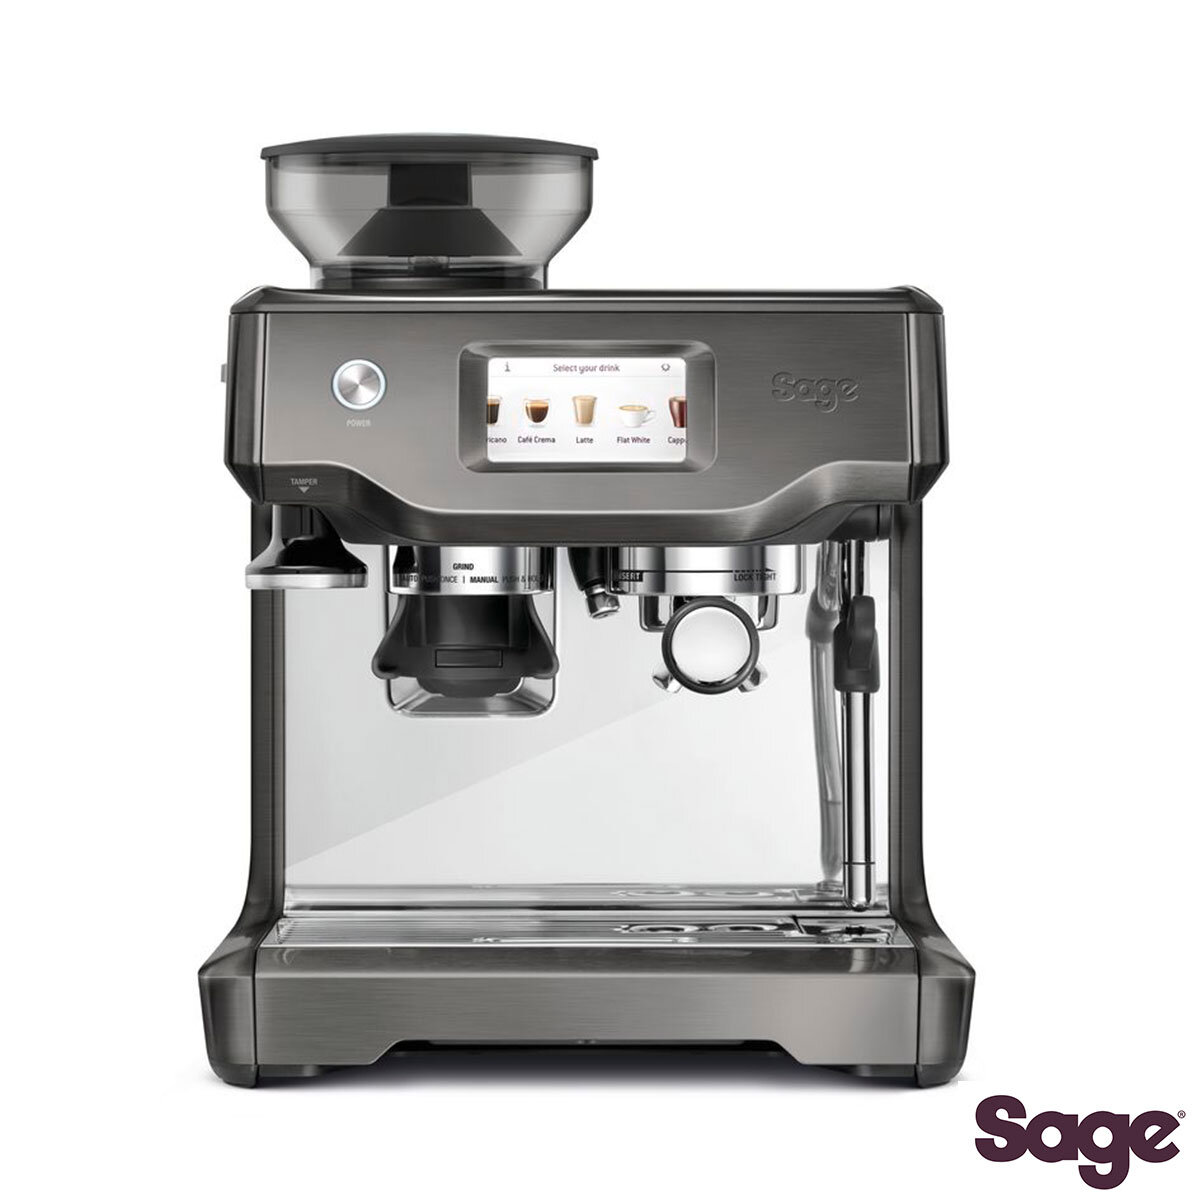 Sage Barista Touch Bean to Cup Coffee Machine in Black Stainless Steel, SES880BST